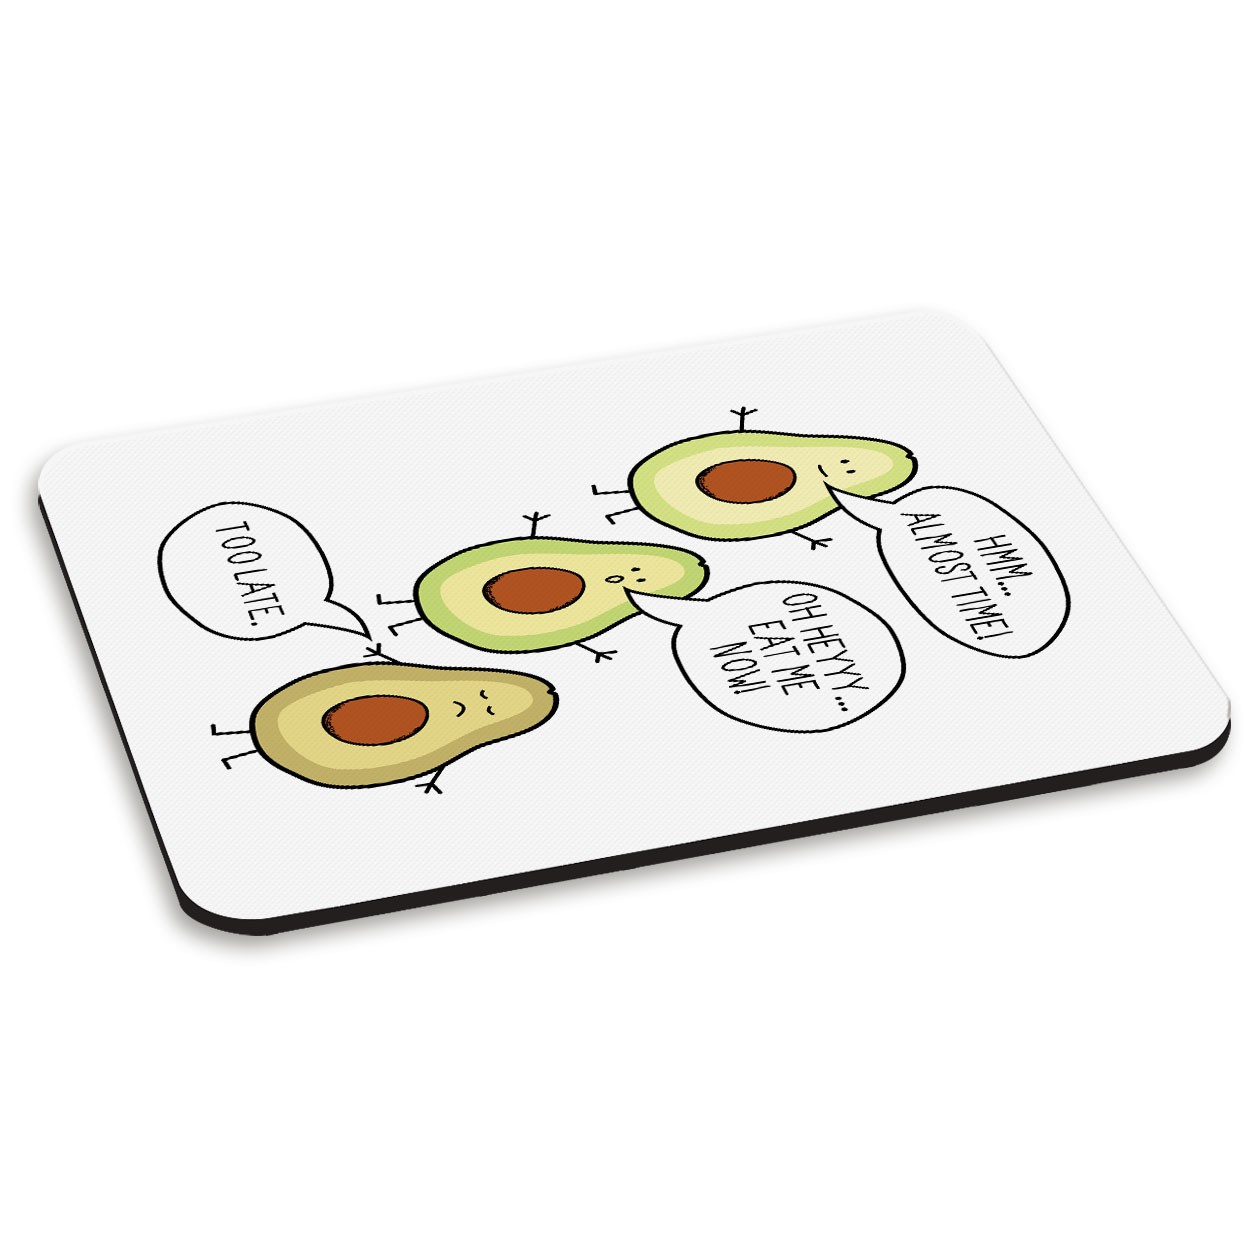 Avocado Eat Me Now Too Late PC Computer Mouse Mat Pad